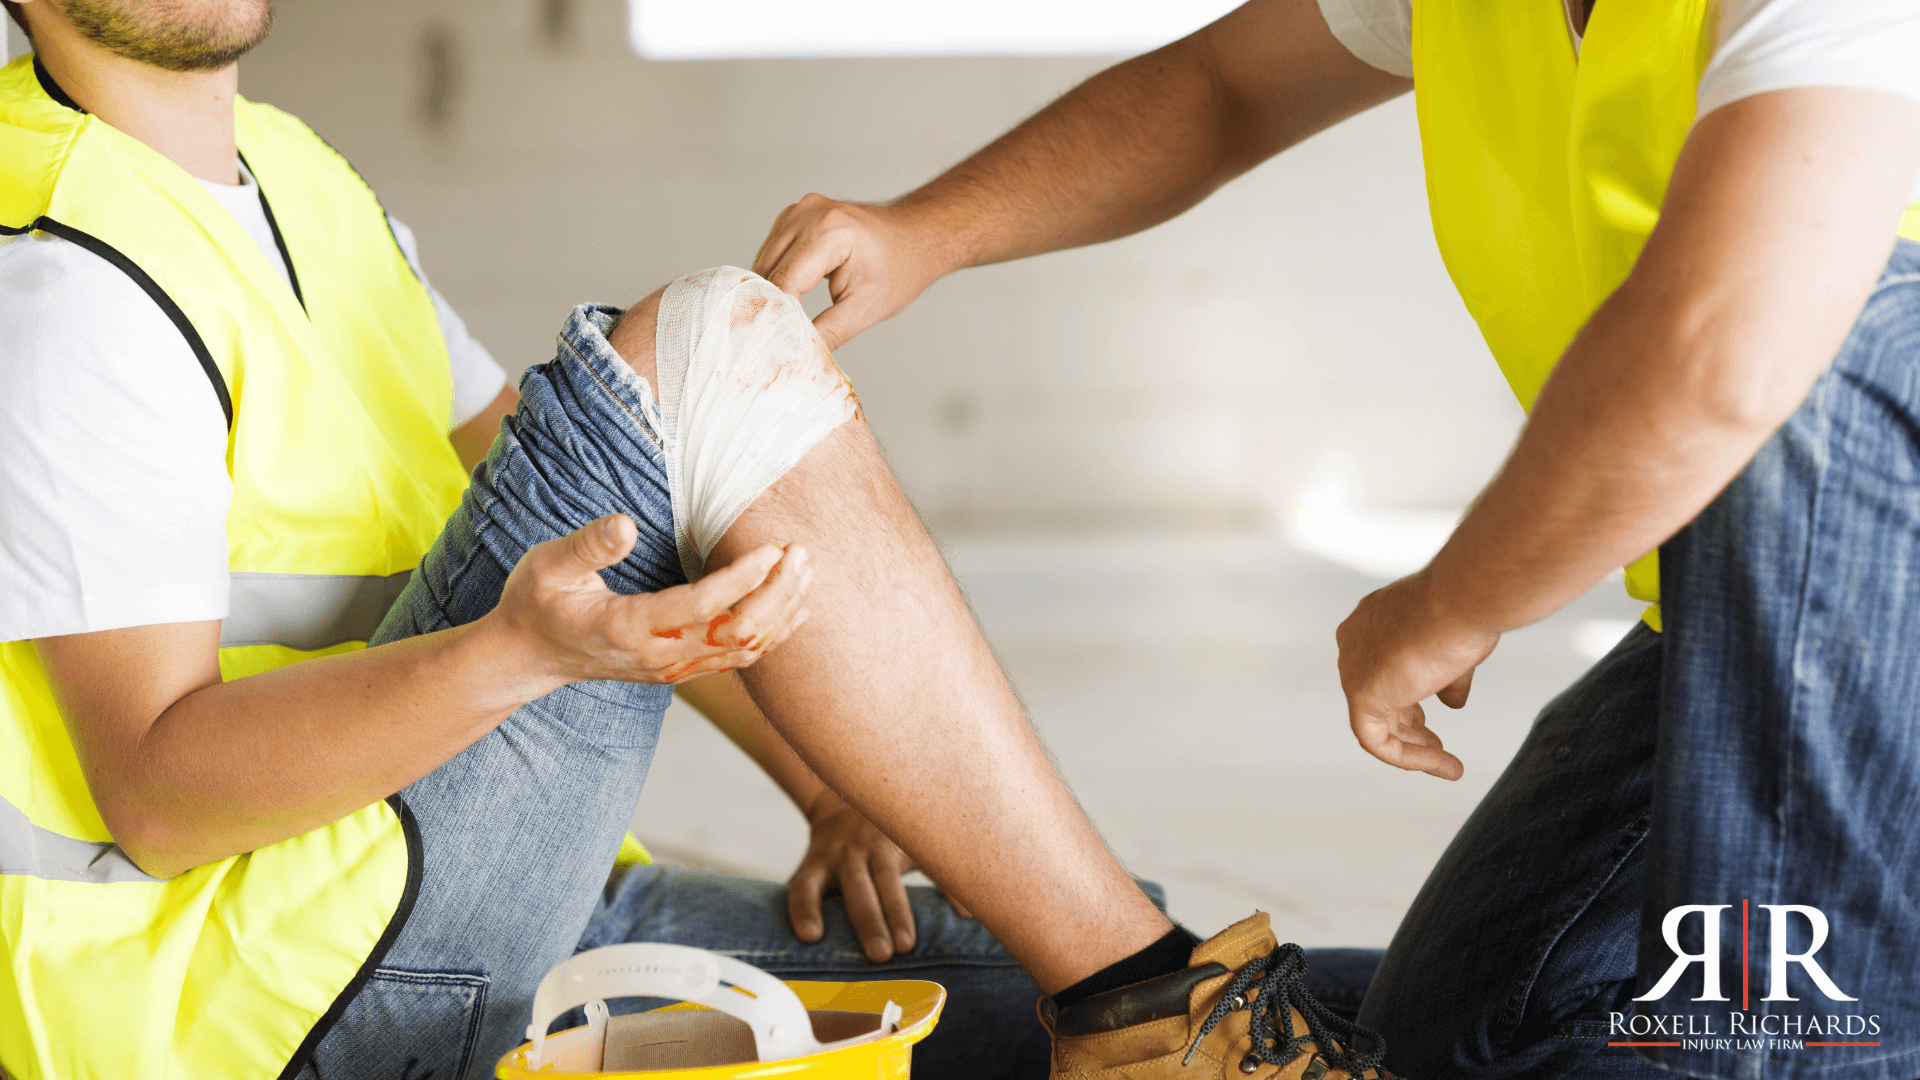 Construction Site Accident Involvement: What To Do?